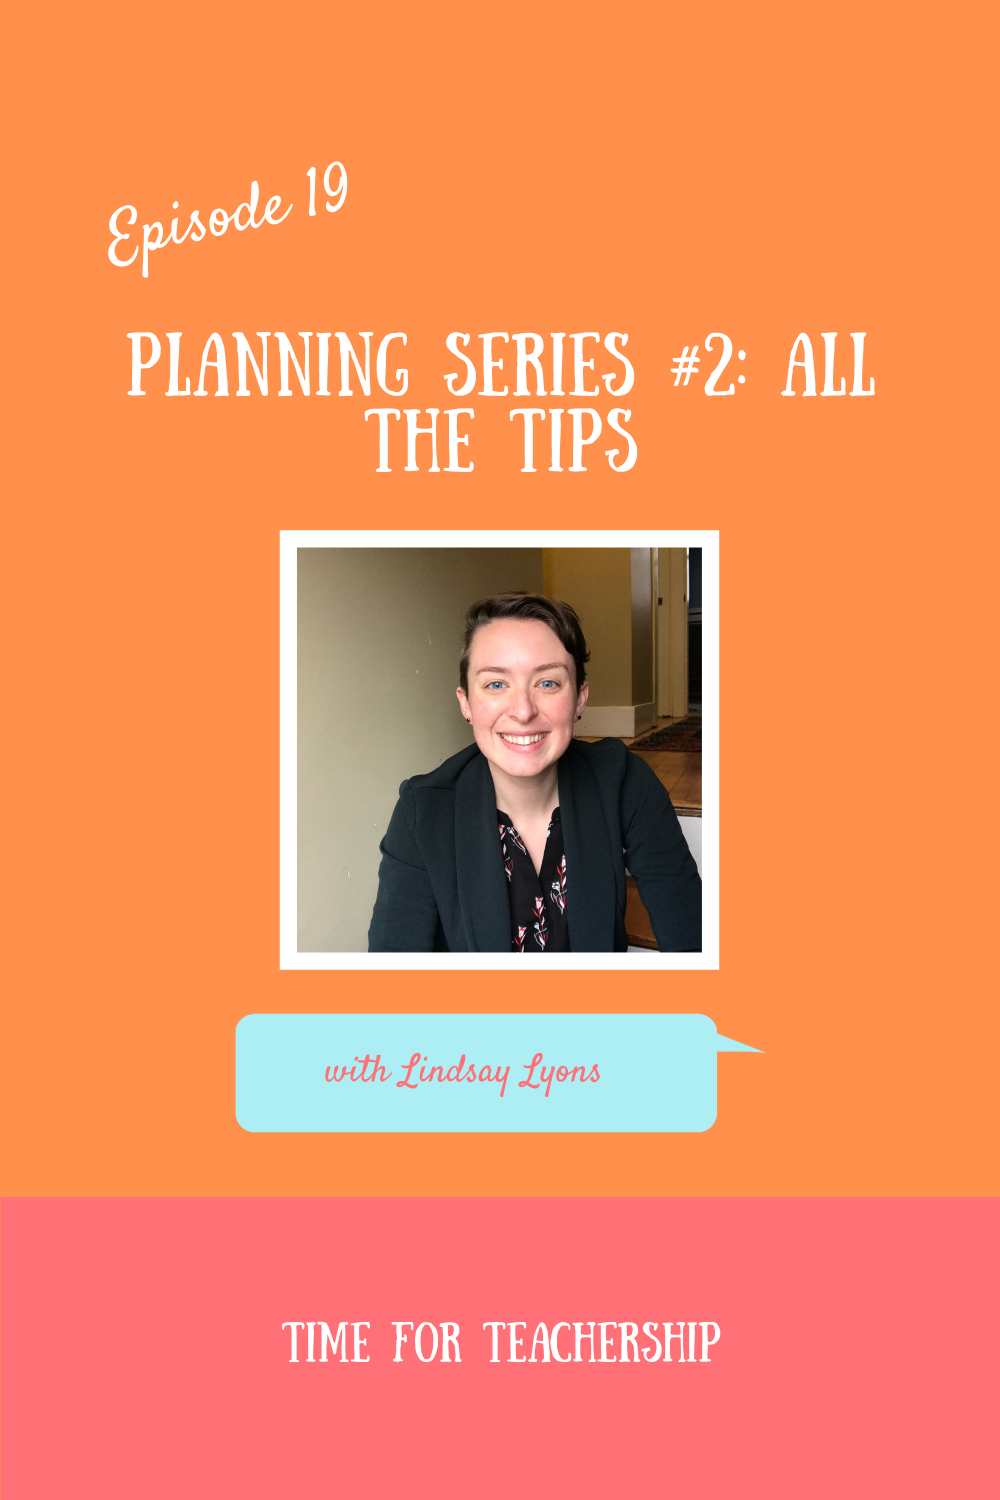 19. Planning Series Part 2-All the Tips. Today I am sharing all the tips with you on how to set and accomplish your goals using some tried and true strategies. Check out the Time for Teachership blog post for how to set yourself up for success. For more tips and #teacherfreebies, sign up for weekly emails at bit.ly/lindsayletter